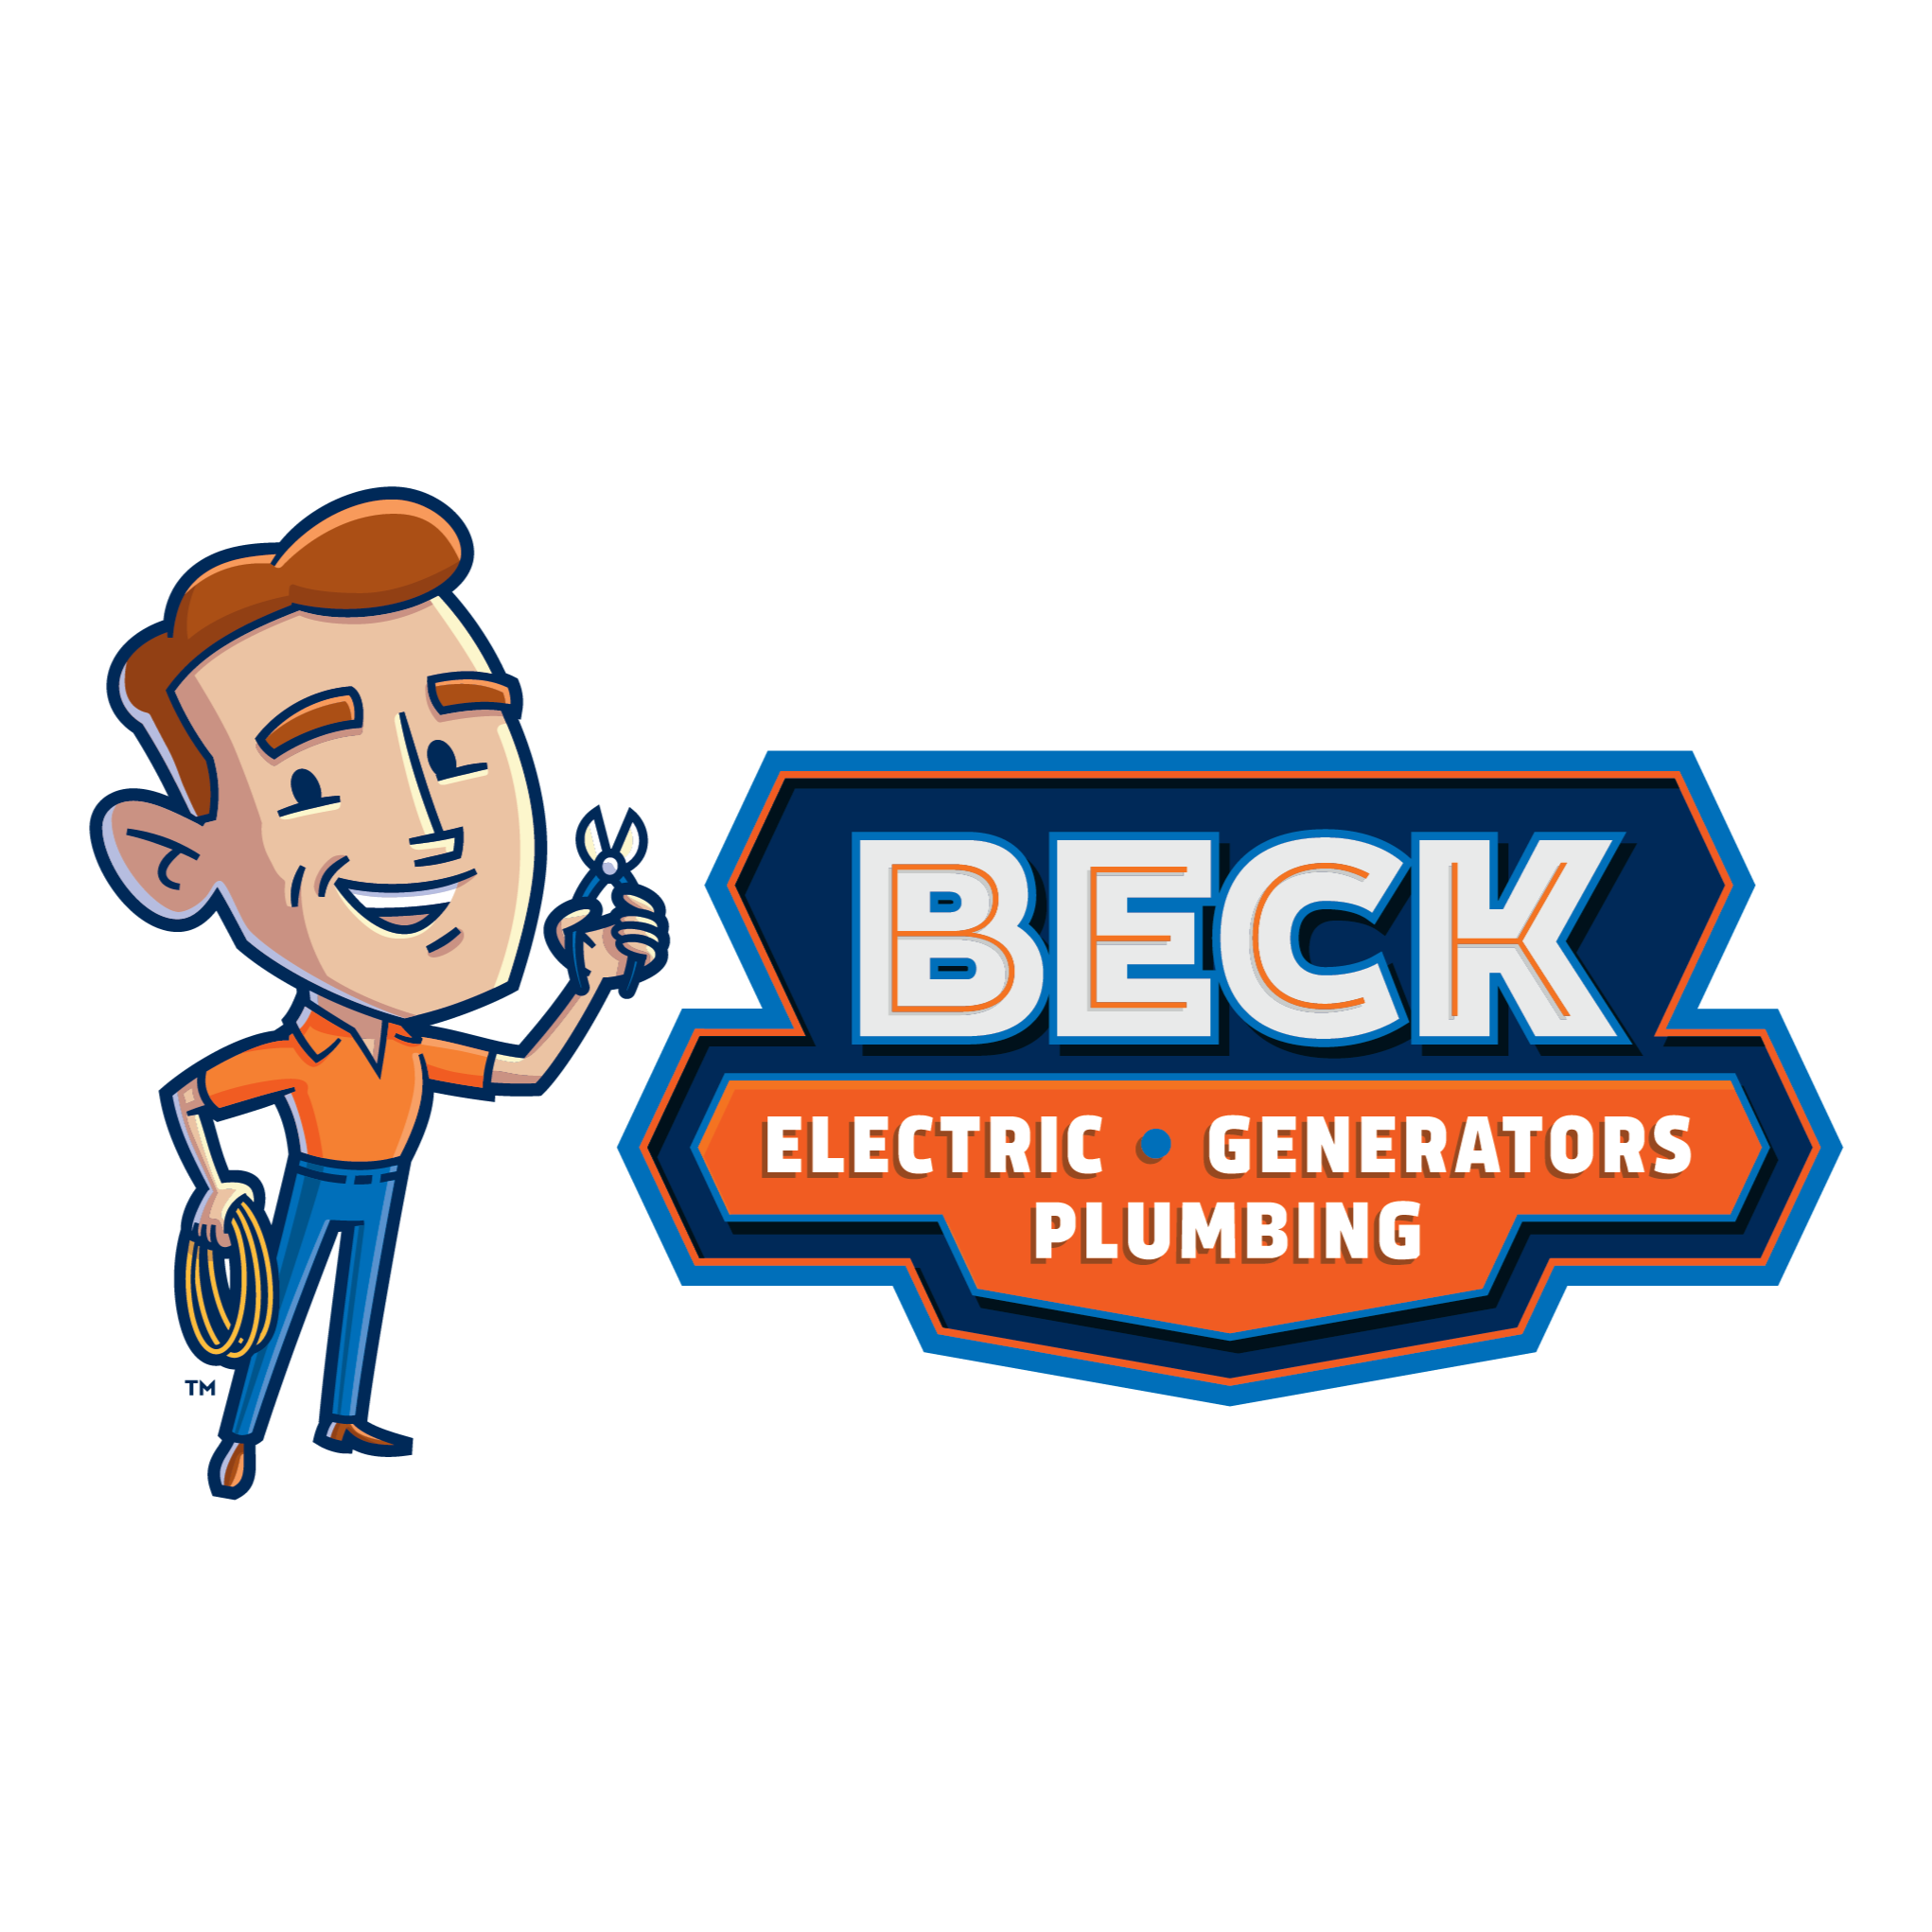 Beck Electric Company